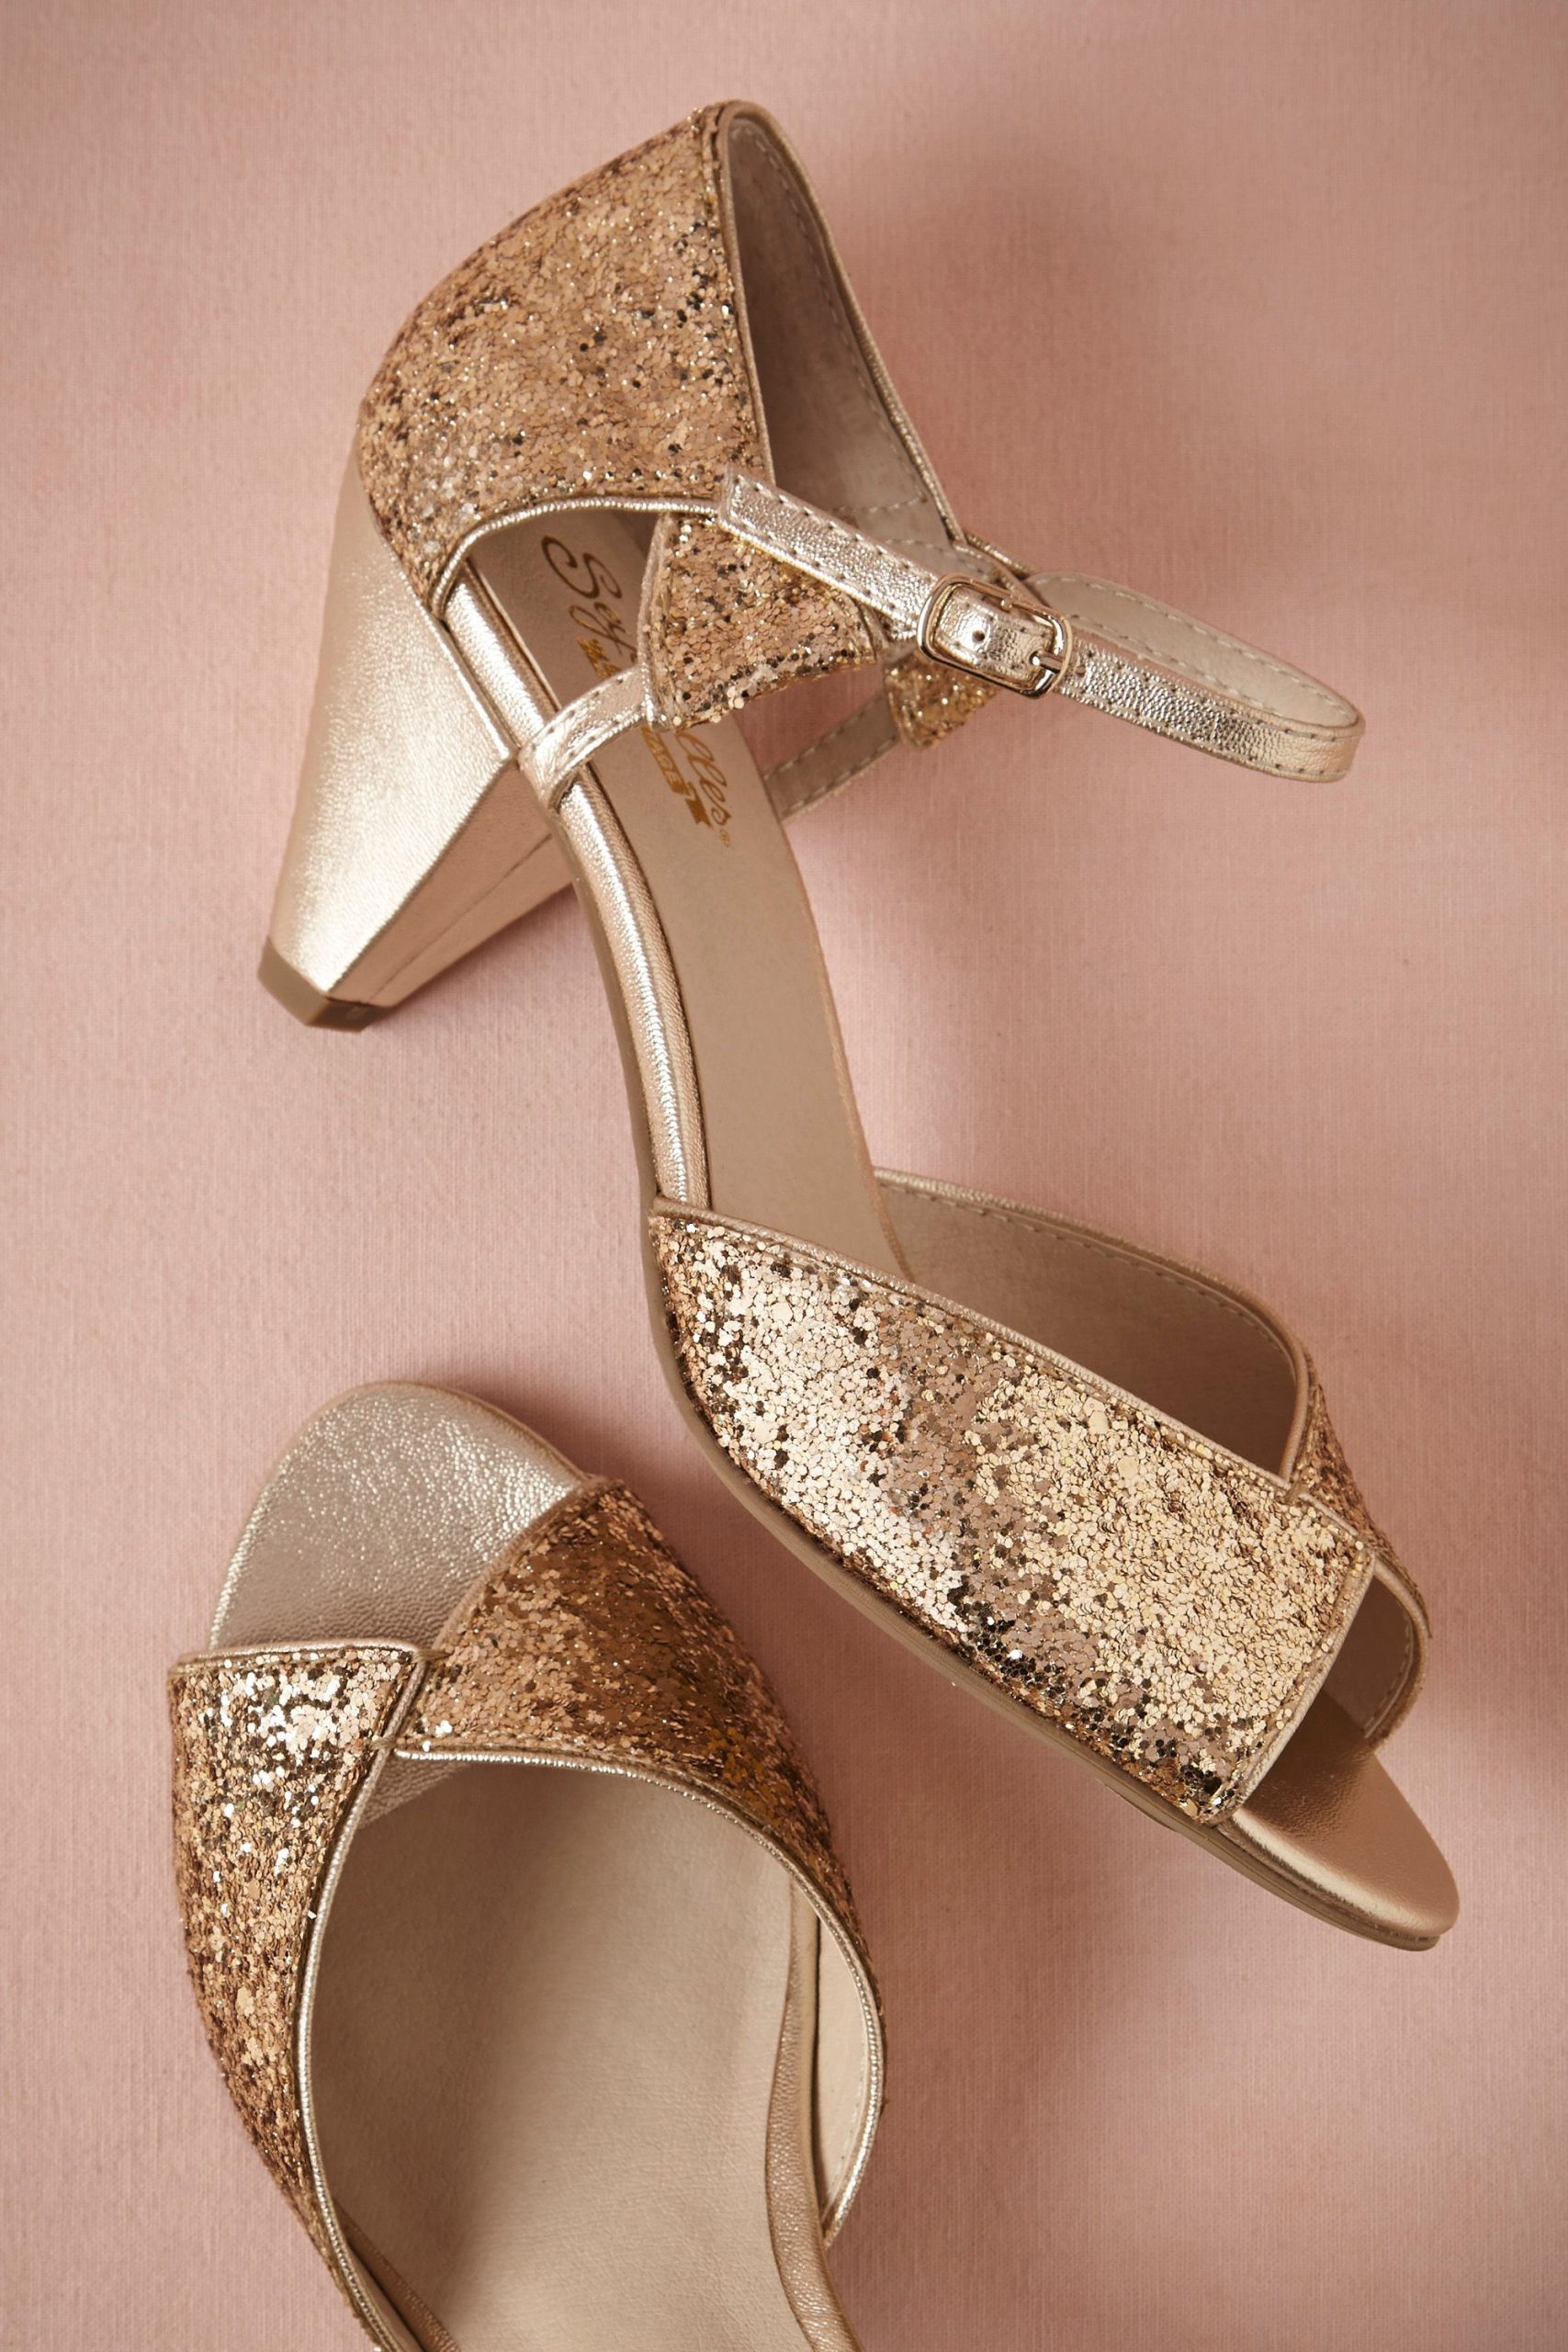 Comfortable Gold Heels For Wedding - 31 Unique and Different DESIGN Ideas